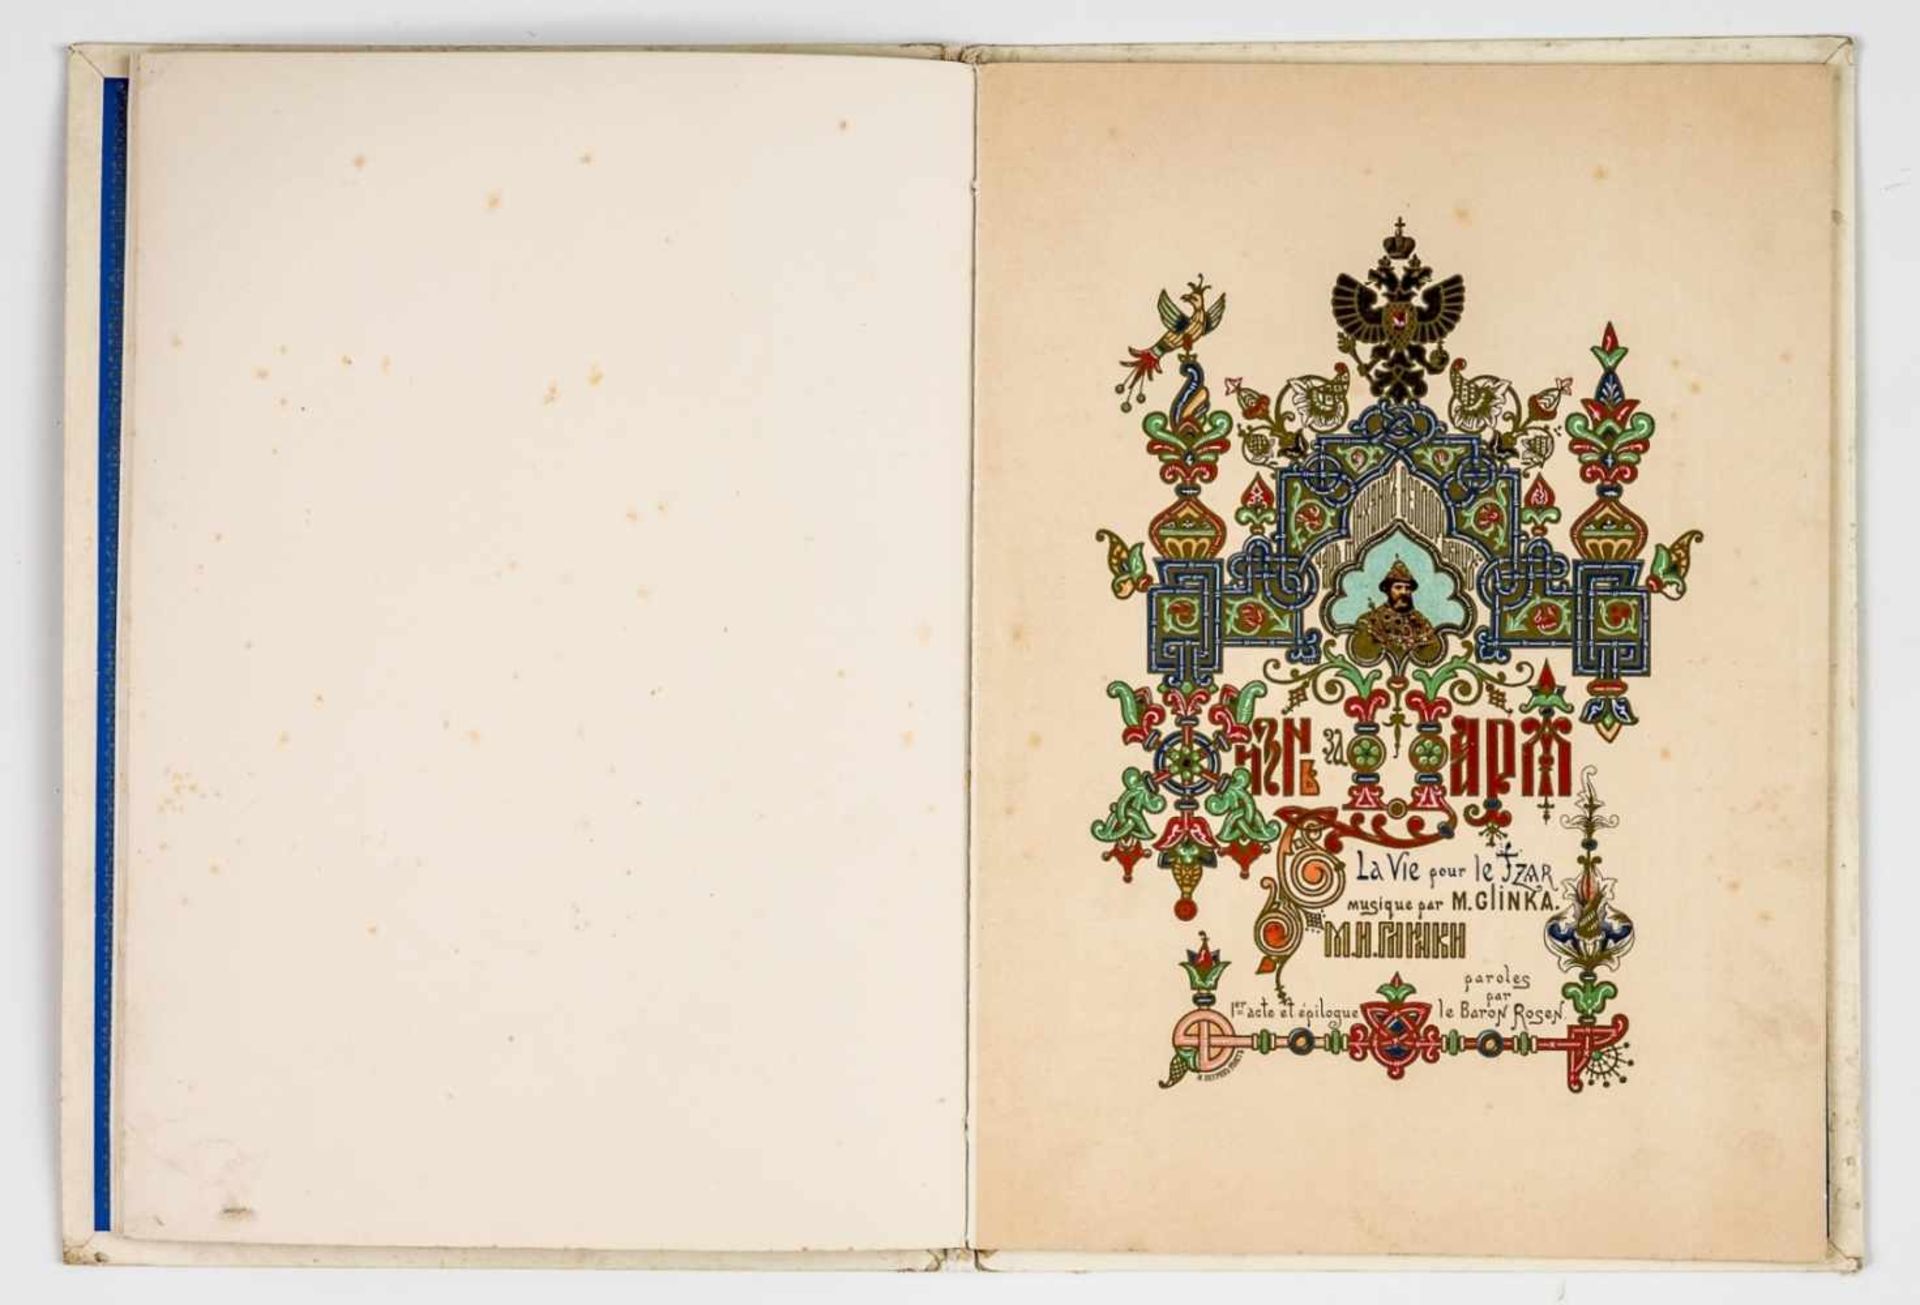 Rare program booklet for the gala on the occasion of the coronation of Nicholas II.,Moscow,